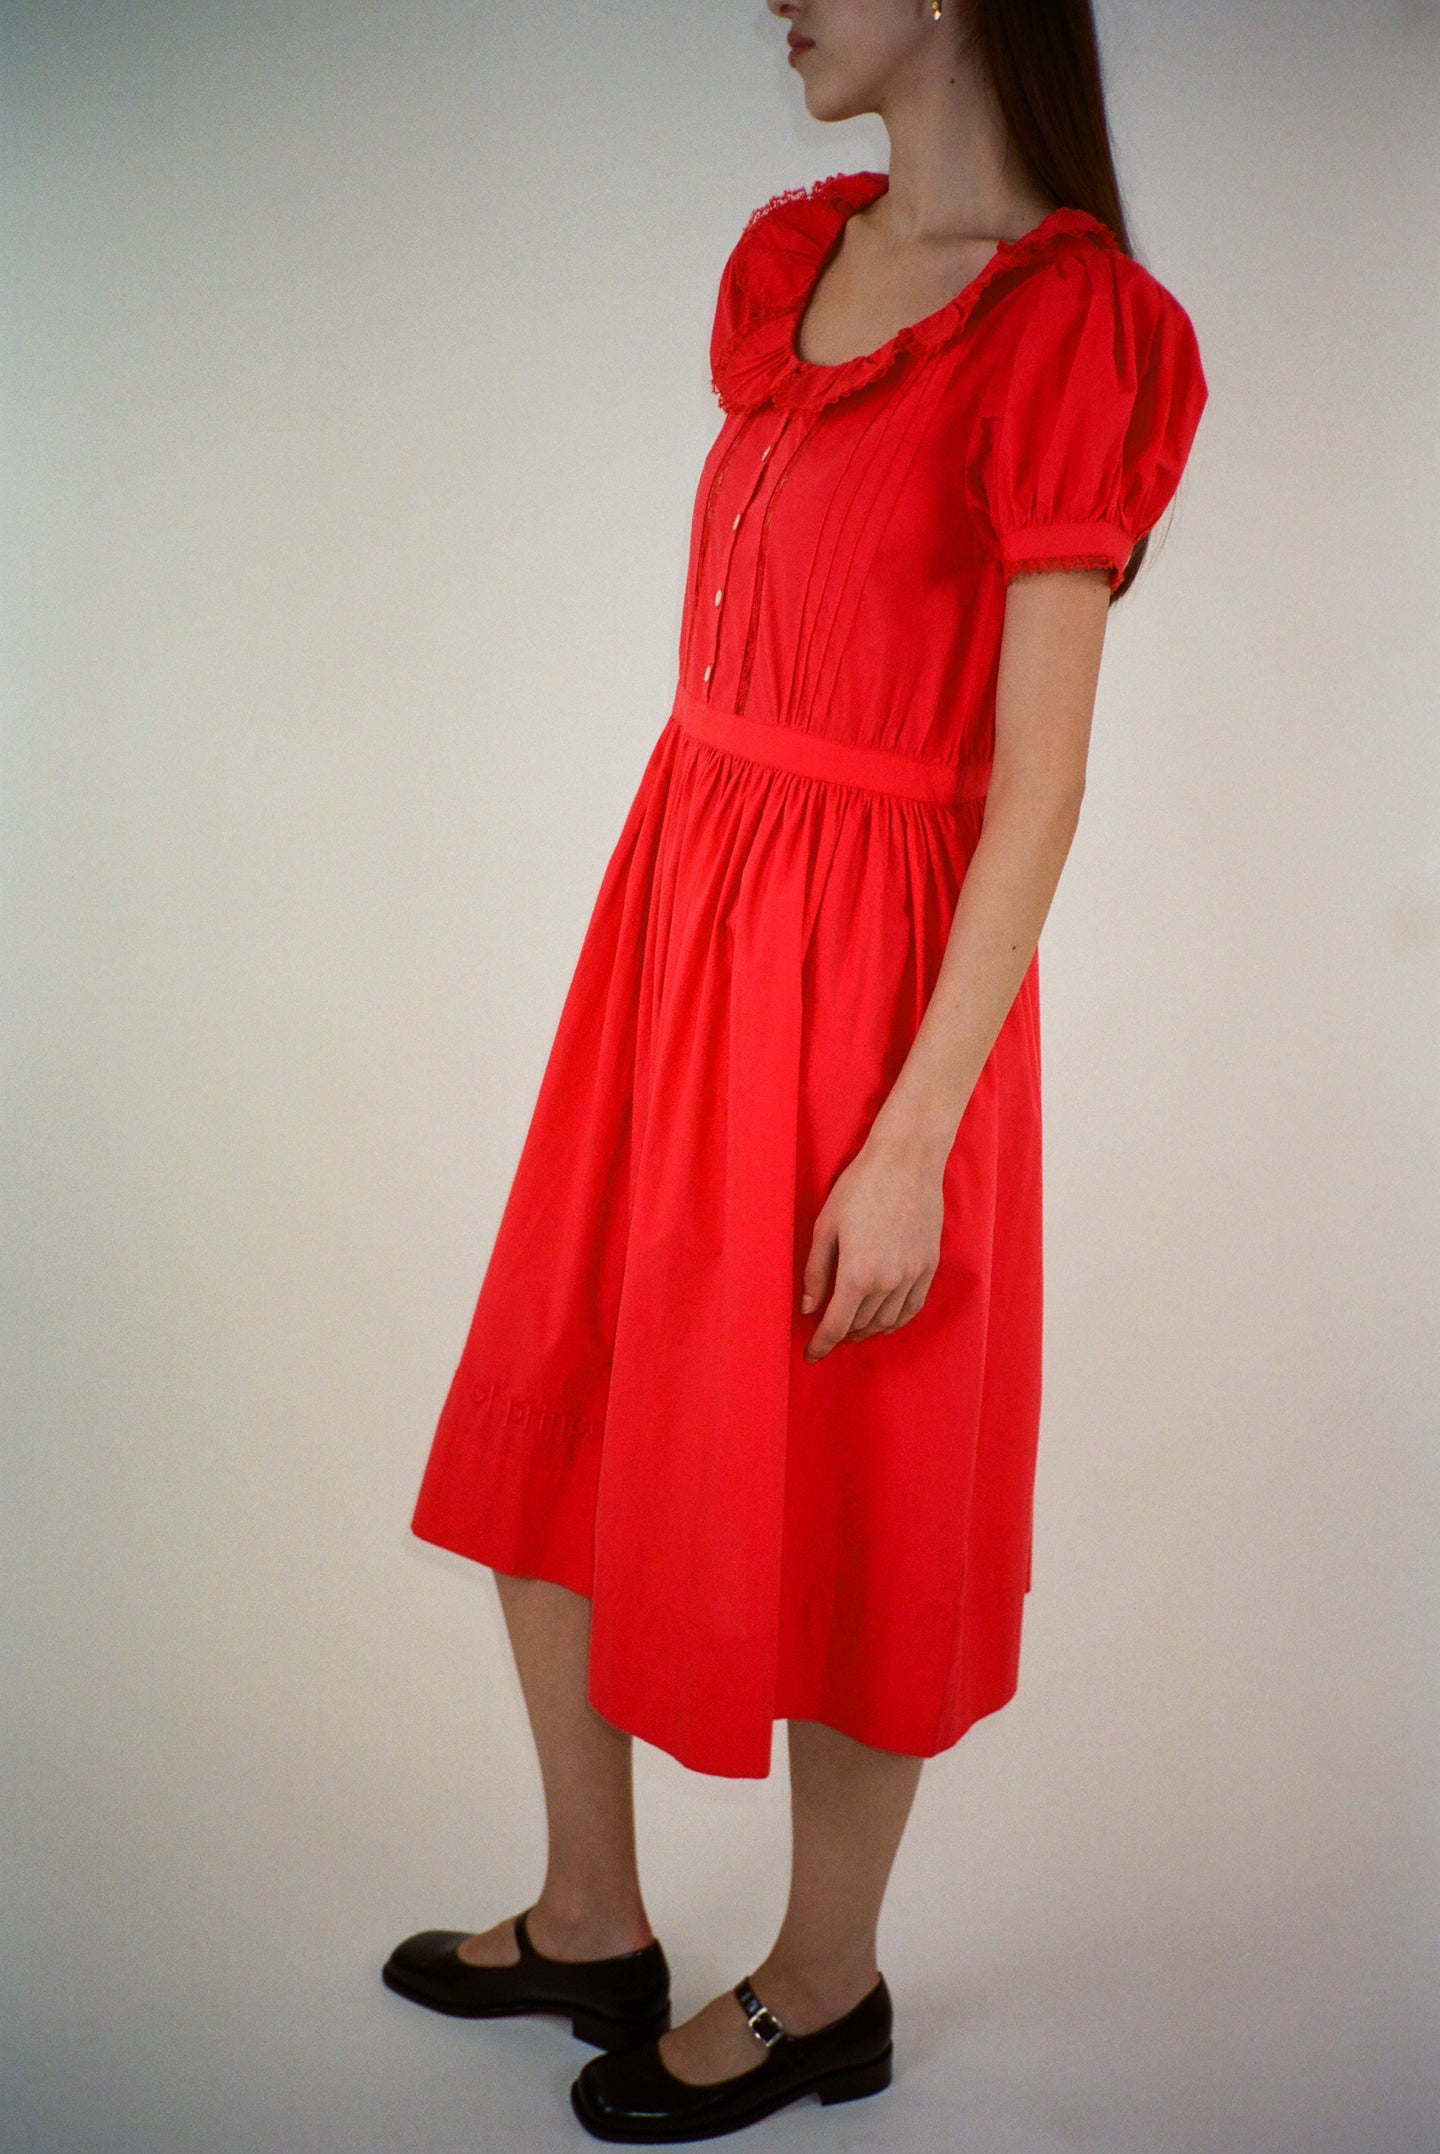 Middy Dress in Red by Sandy Liang